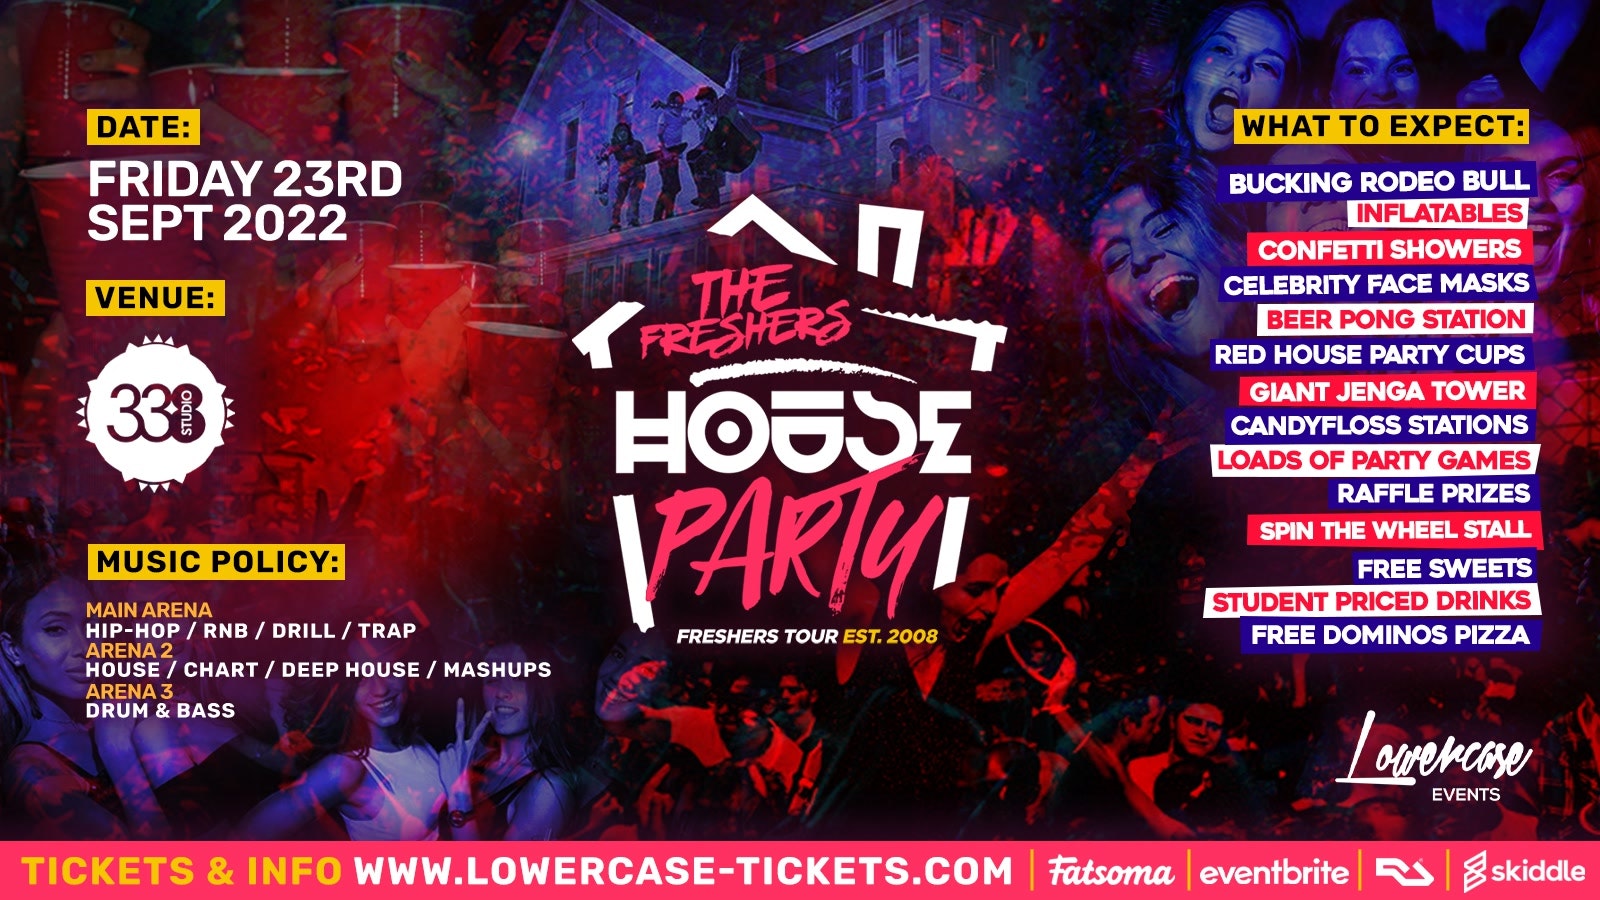 THE PROJECT X FRESHERS HOUSE PARTY @ STUDIO 338 LONDON! – LONDON FRESHERS WEEK 2022 [FRESHERS WEEK 1]